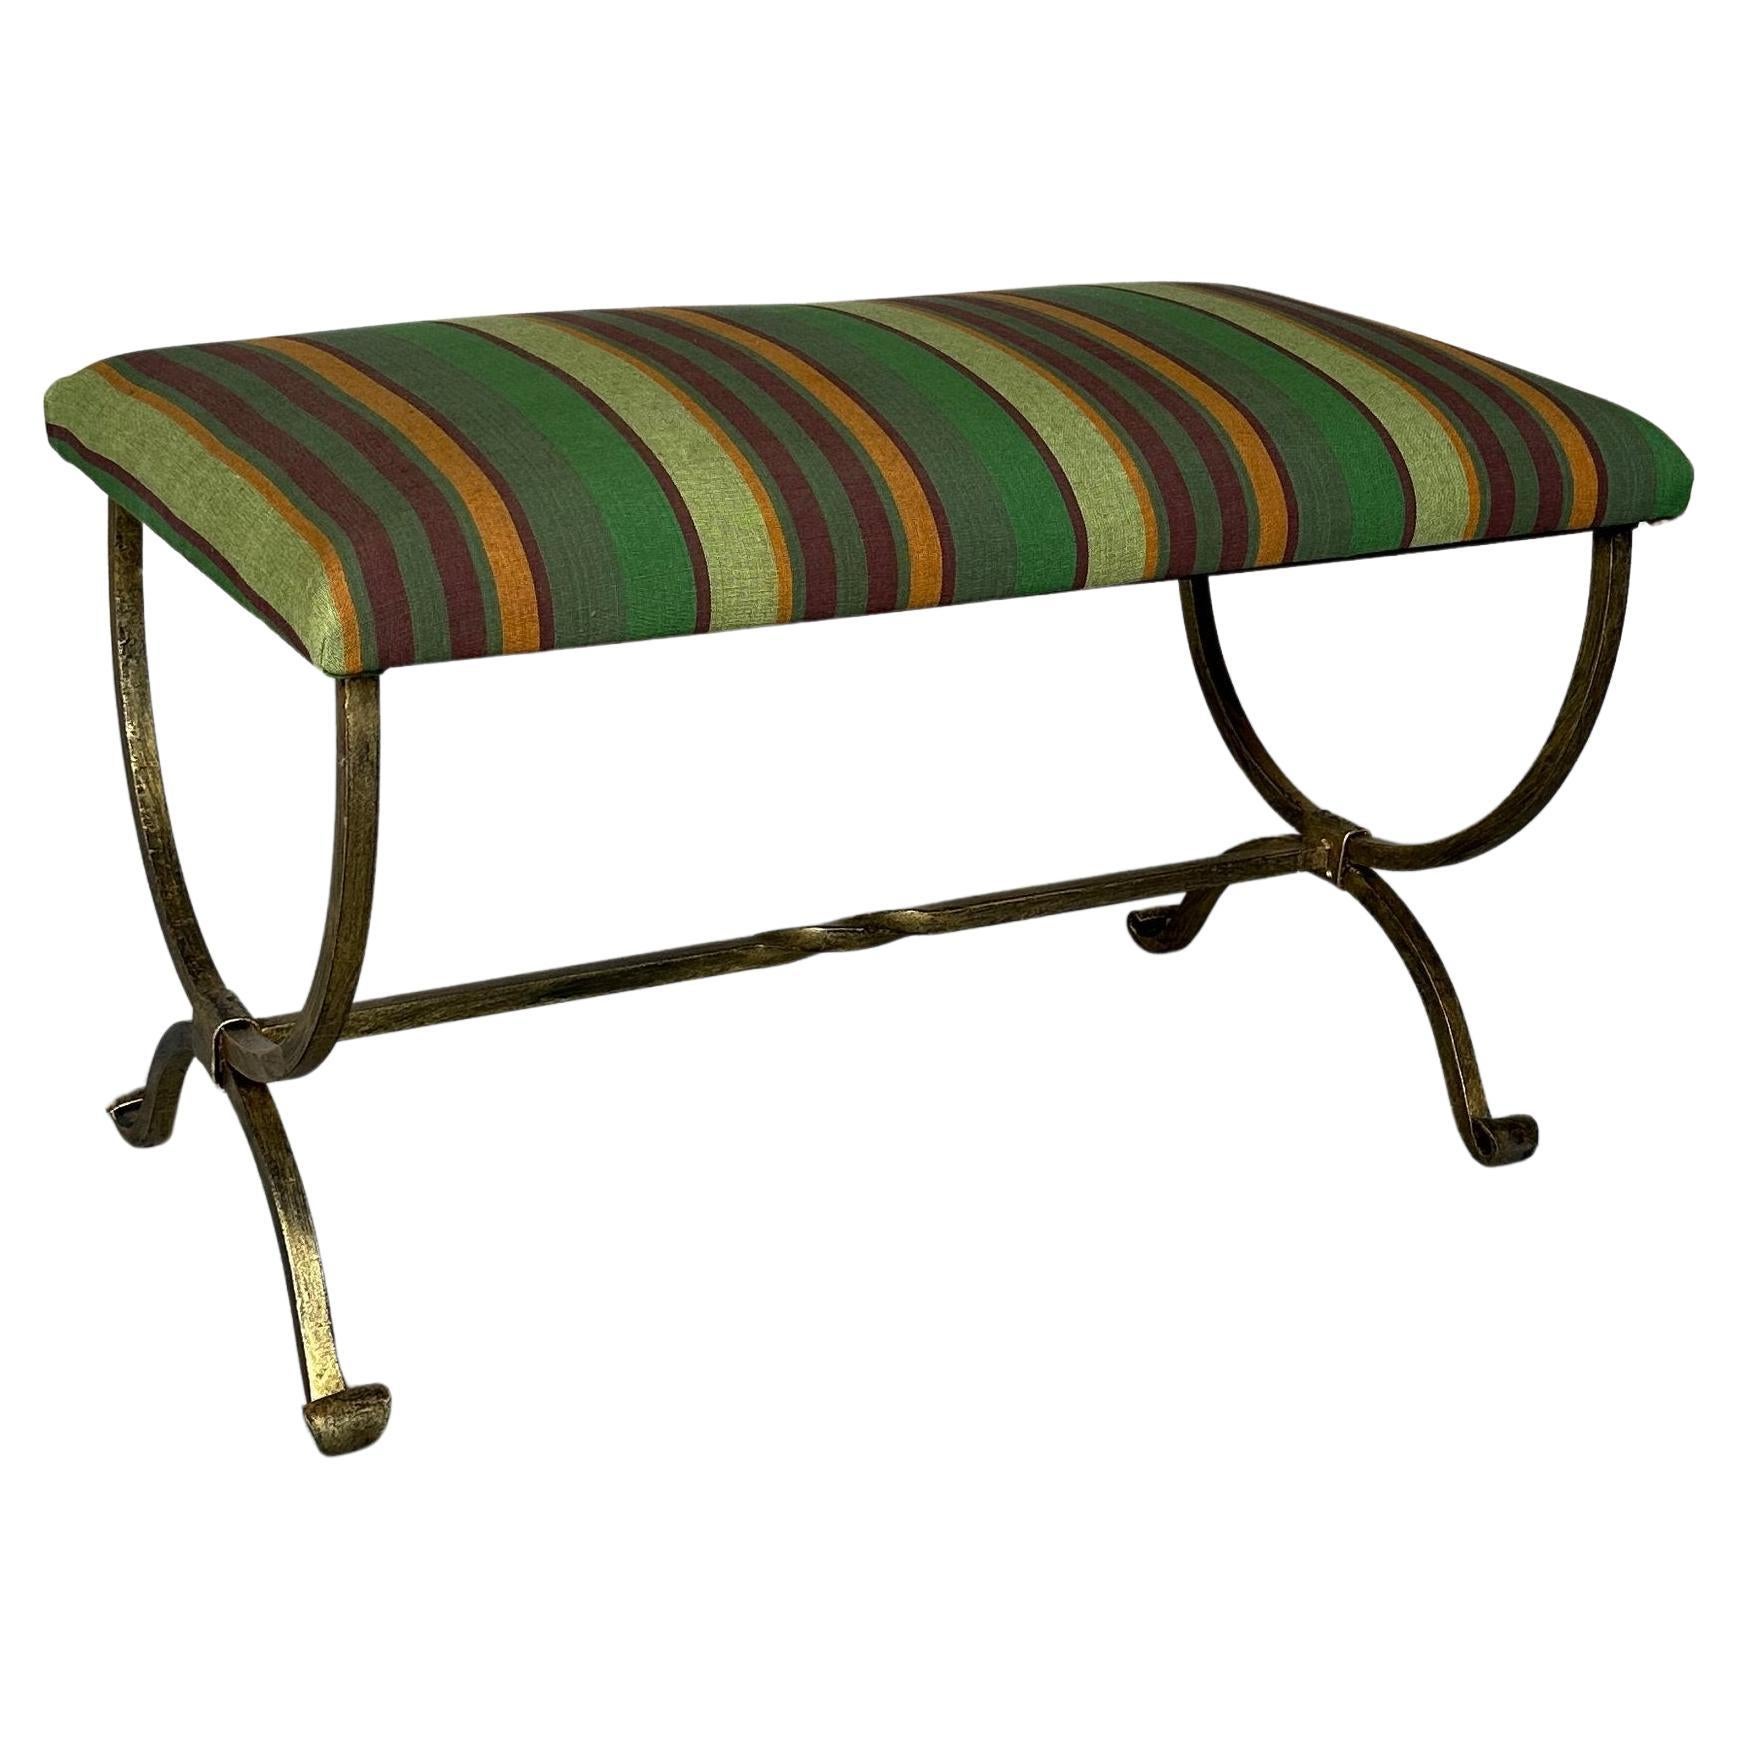 Spanish Iron Bench in Striped Fabric For Sale